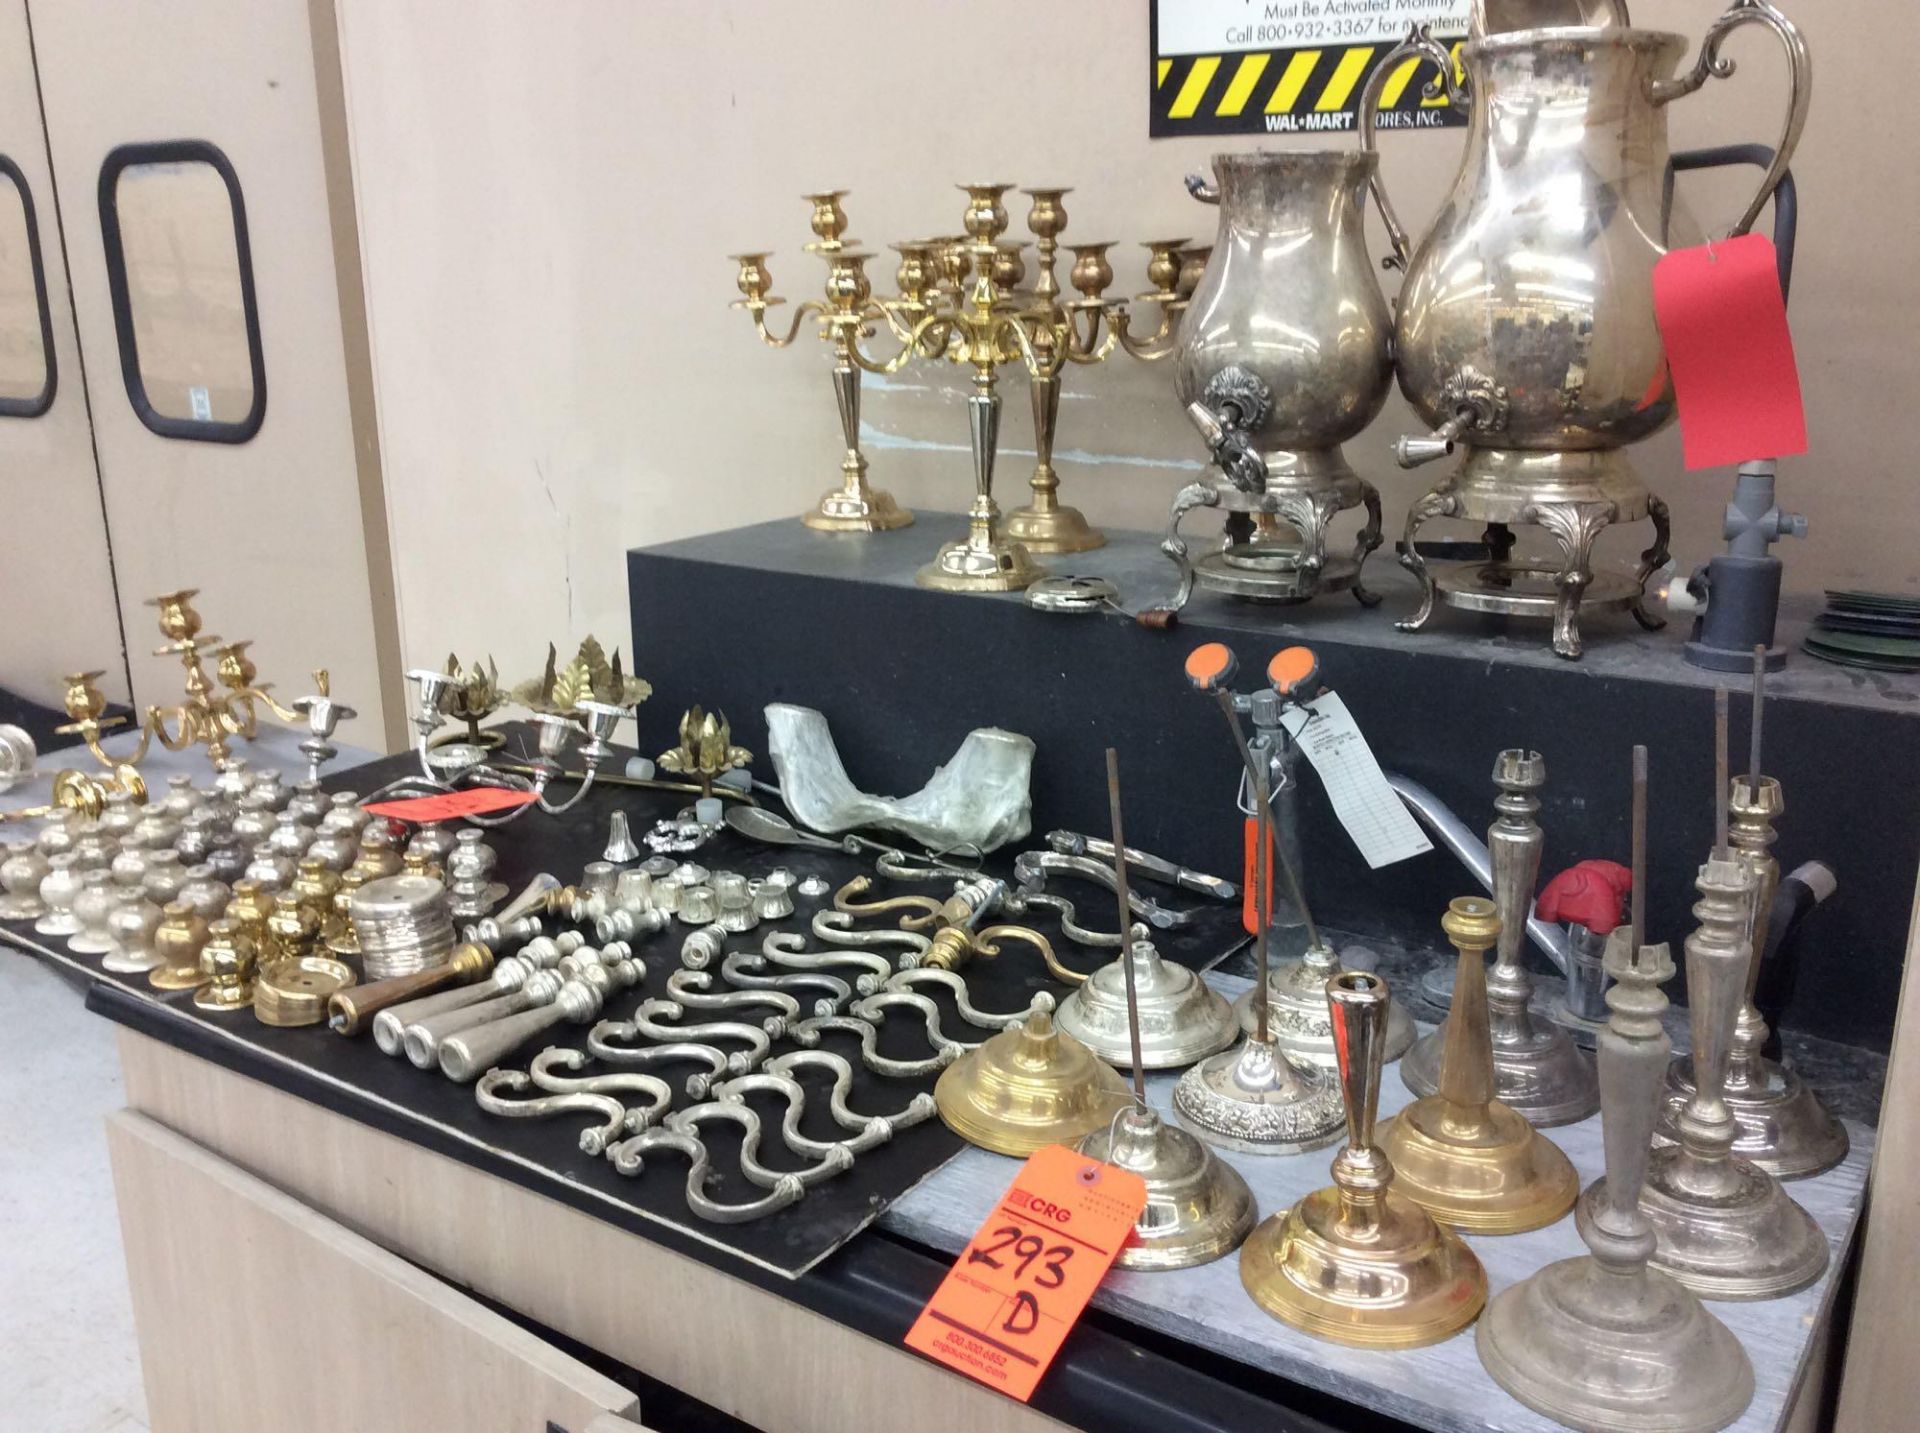 Lot of asst candelabra and candle holder parts, most silver-plated - and (2) silver-plated coffee - Image 2 of 2